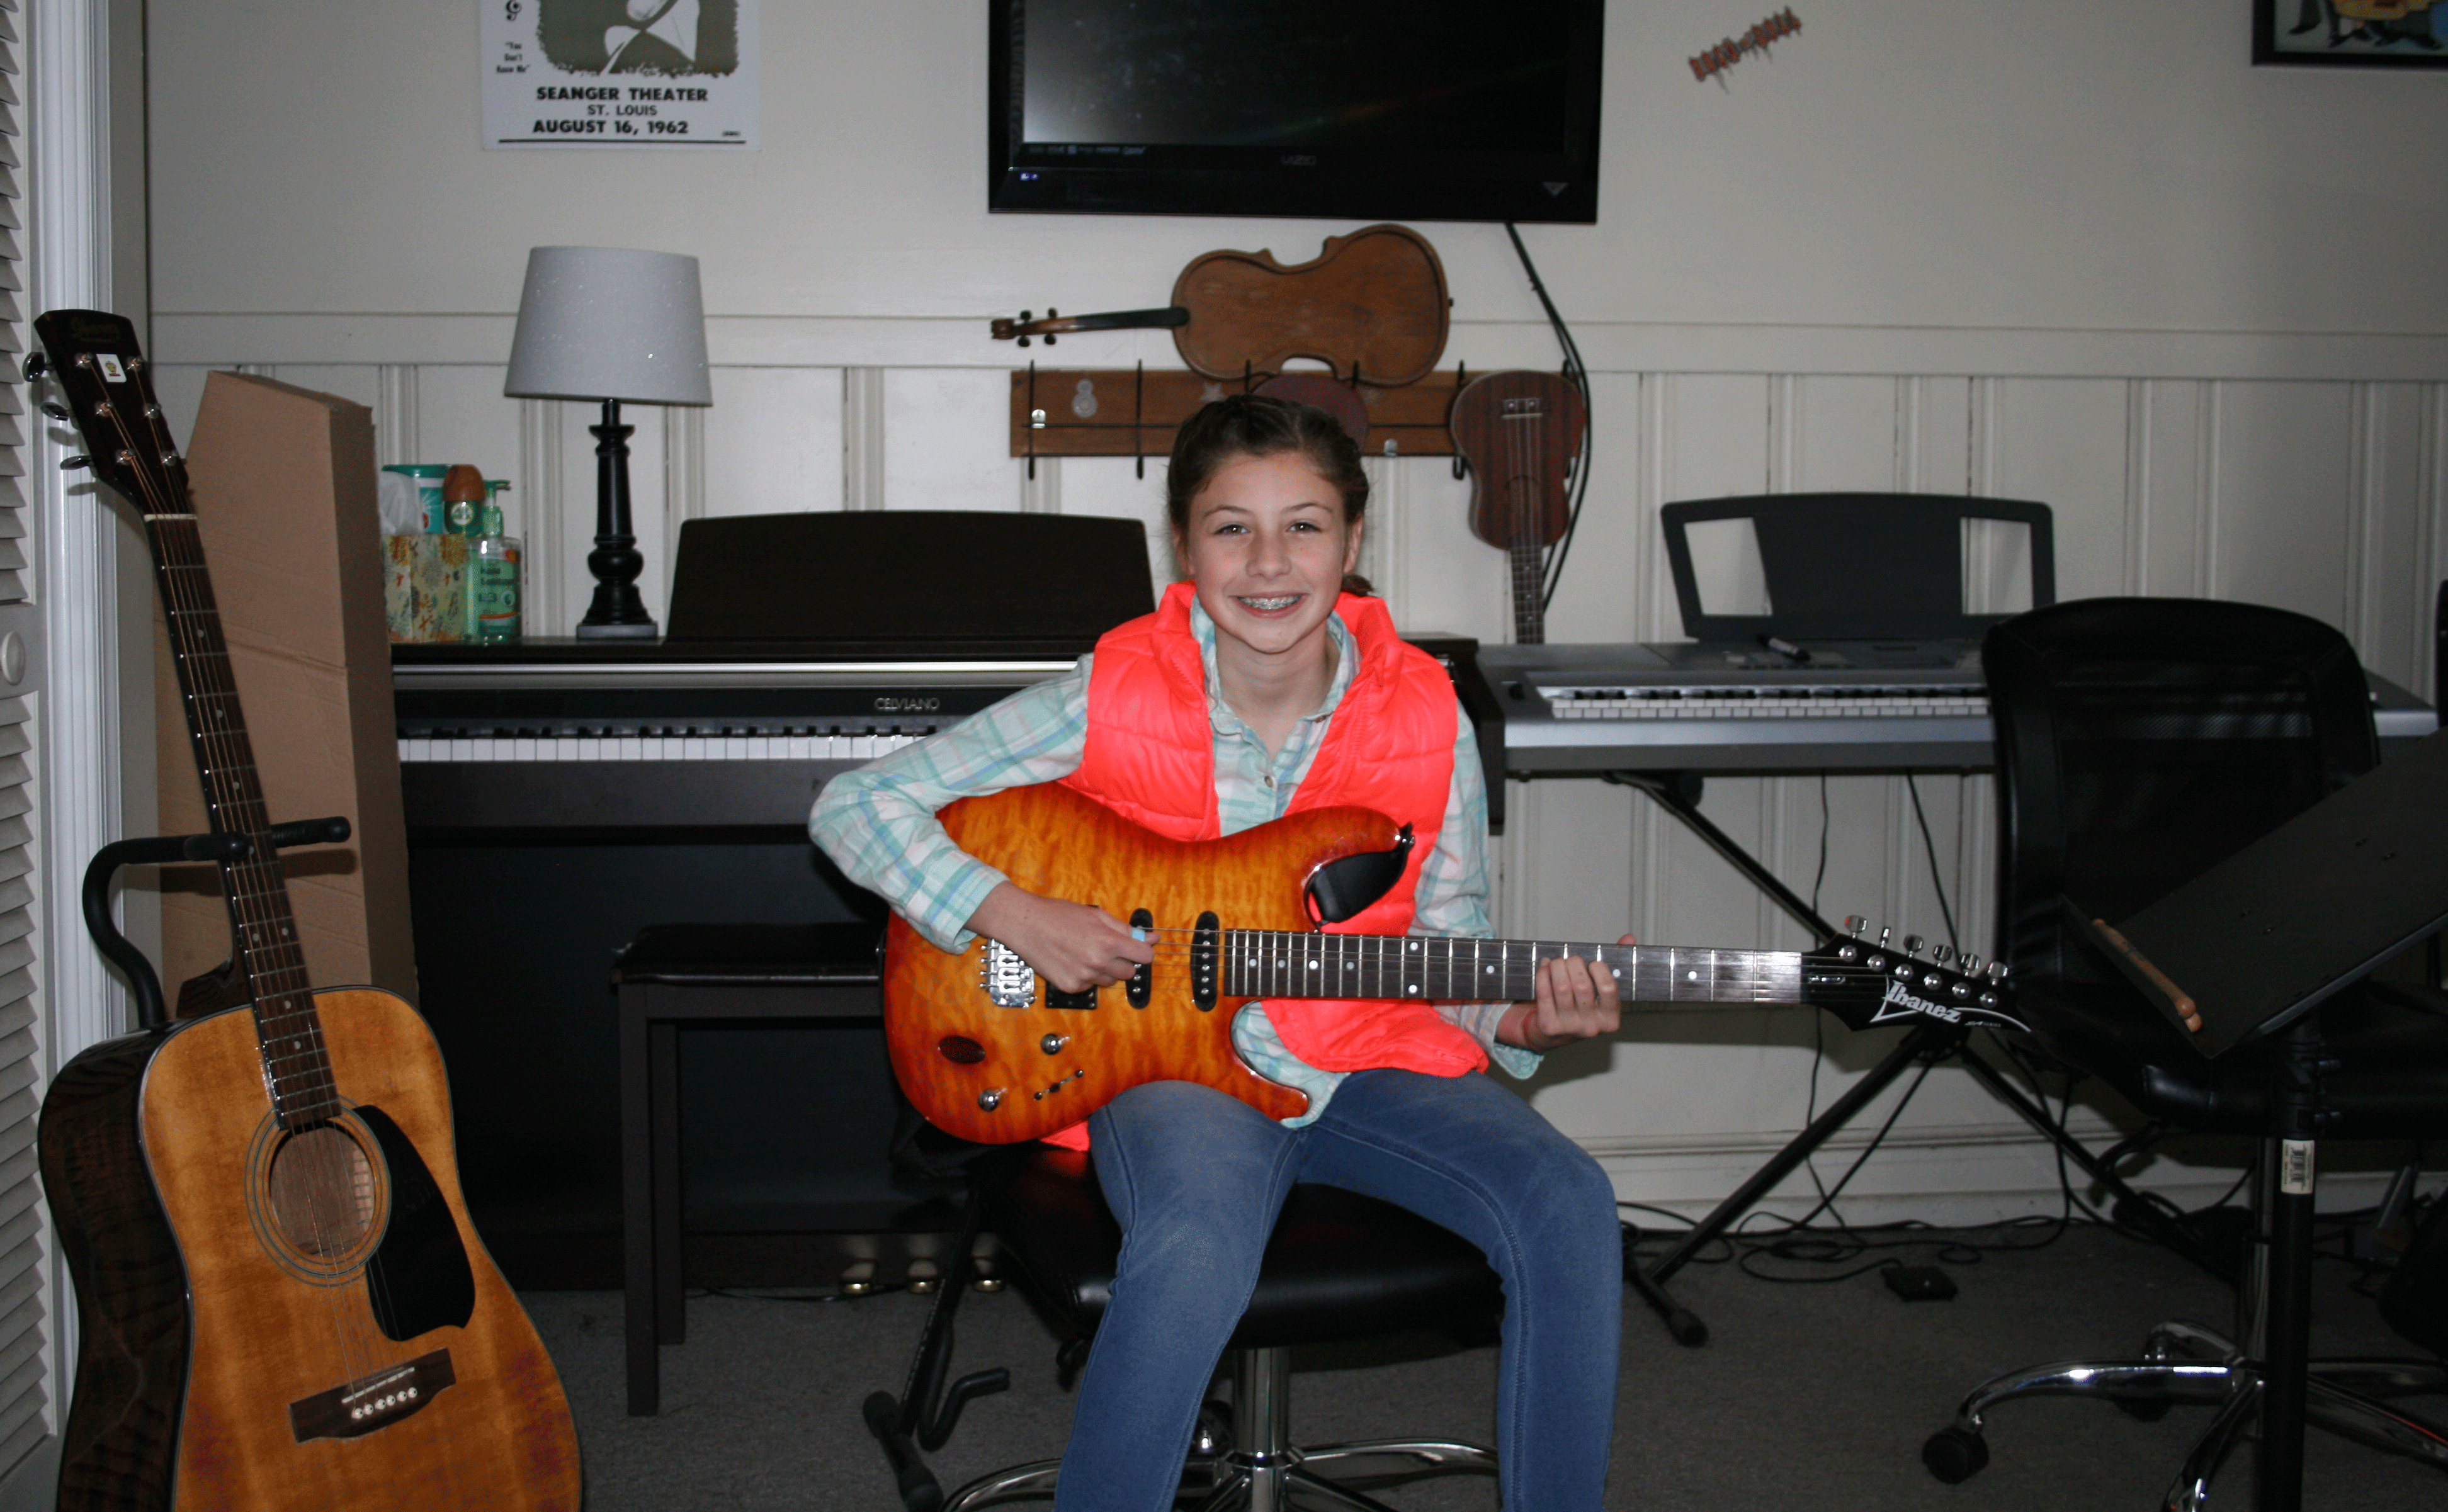 Girl with guitar, on line music lessons, music lessons, pianos, flat screen TV, electric guitar, acoustic guitar